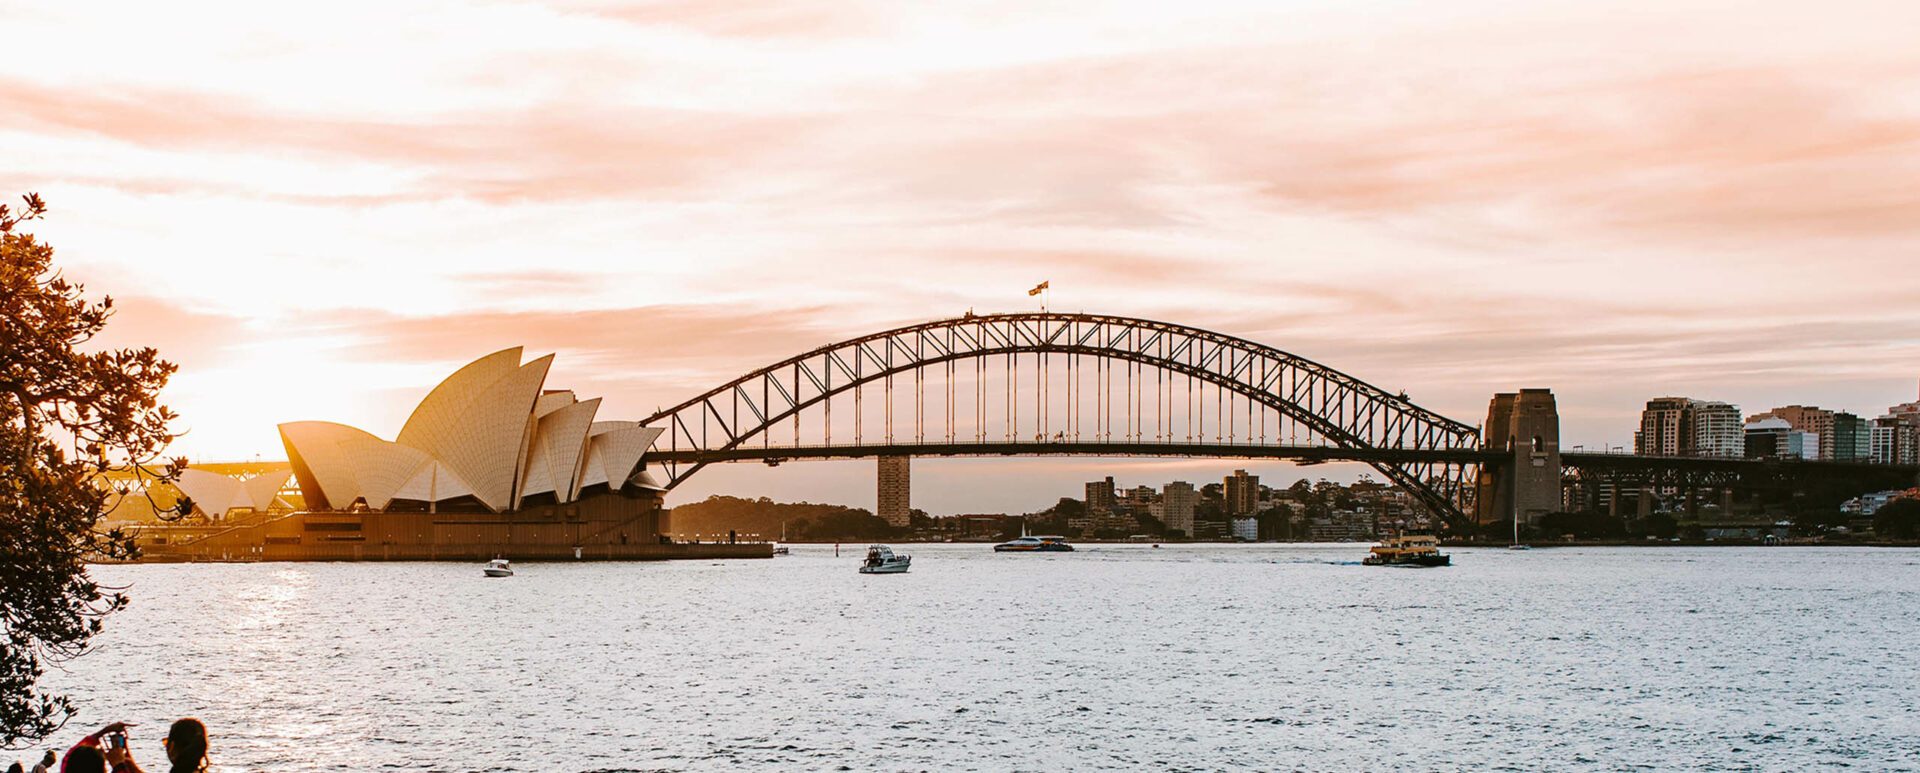 How Best to Spend 48 Hours in and Around Sydney